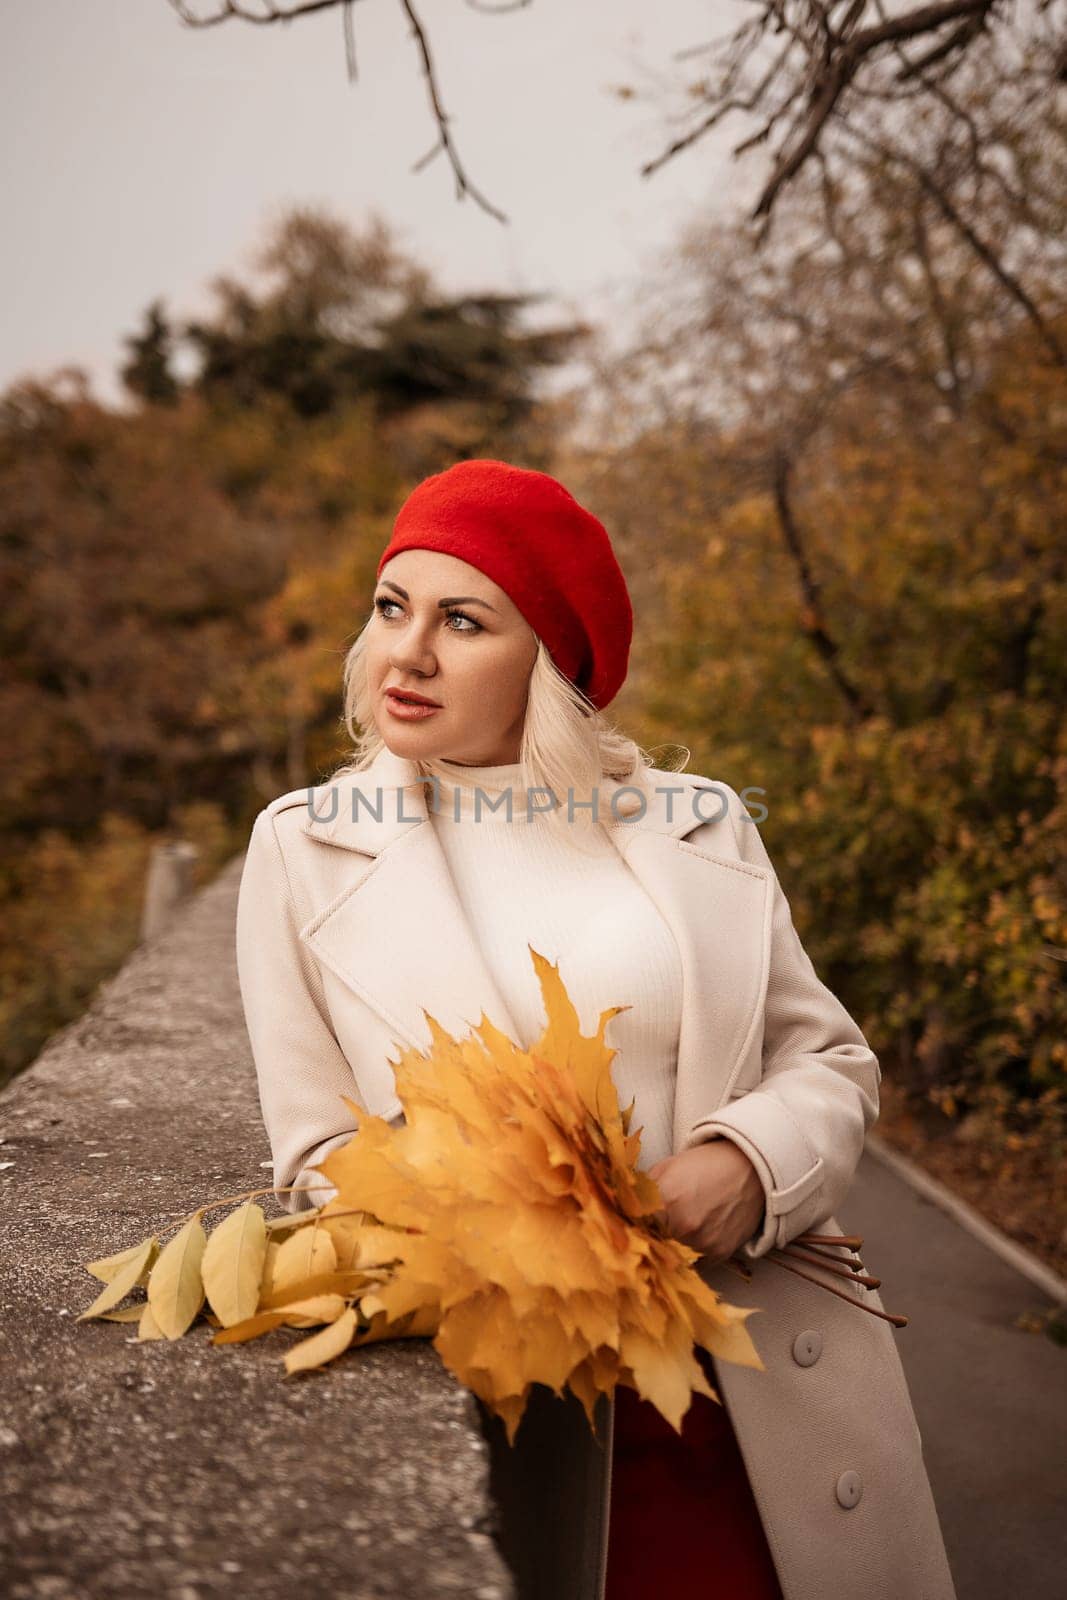 autumn woman in a red beret, a light coat and a red skirt, against the backdrop of an autumn park with yellow leaves in her hands.